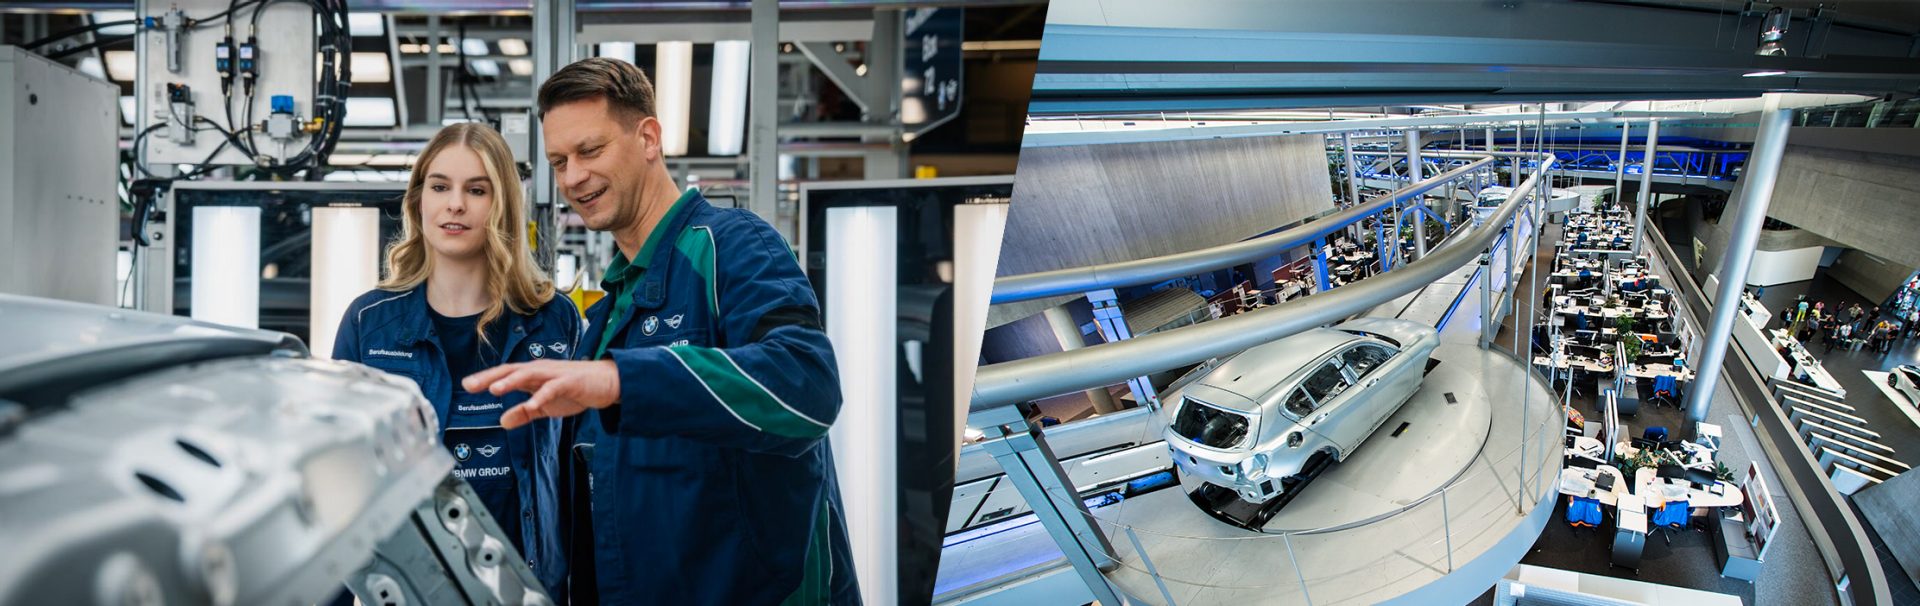 Apprentice with trainer and interior view of the central building at the BMW plant in Leipzig